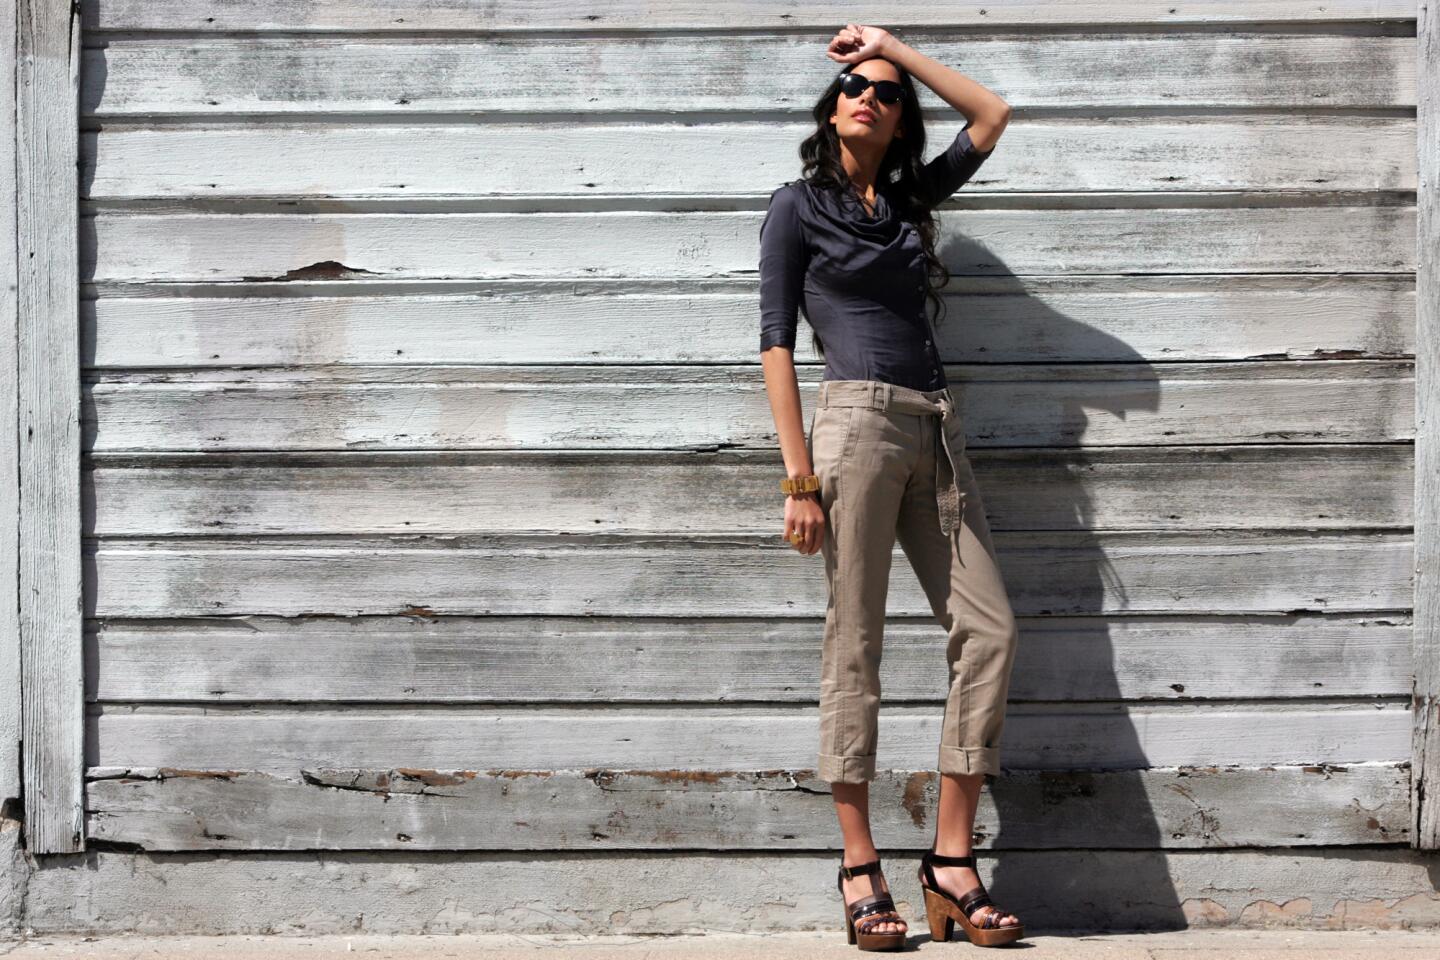 Helmut Lang shirt $255 at Helmut Lang, Melrose Ave., Banana Republic pants $69.50 at www.bananarepublic.com, Robert Clergerie shoes $690 at Barneys New York, Beverly Hills, CC Skye bracelet $175 and ring $125 at www.ccskye.com. All photographs shot by Bob Chamberlin / Los Angeles Times;  Styled by Melissa Magsaysay; Models: Nina Mansker and Cole Gerdes at Ford Models; Hair by Steve Mason; Makeup by Agostina both at Exclusive Artists Management